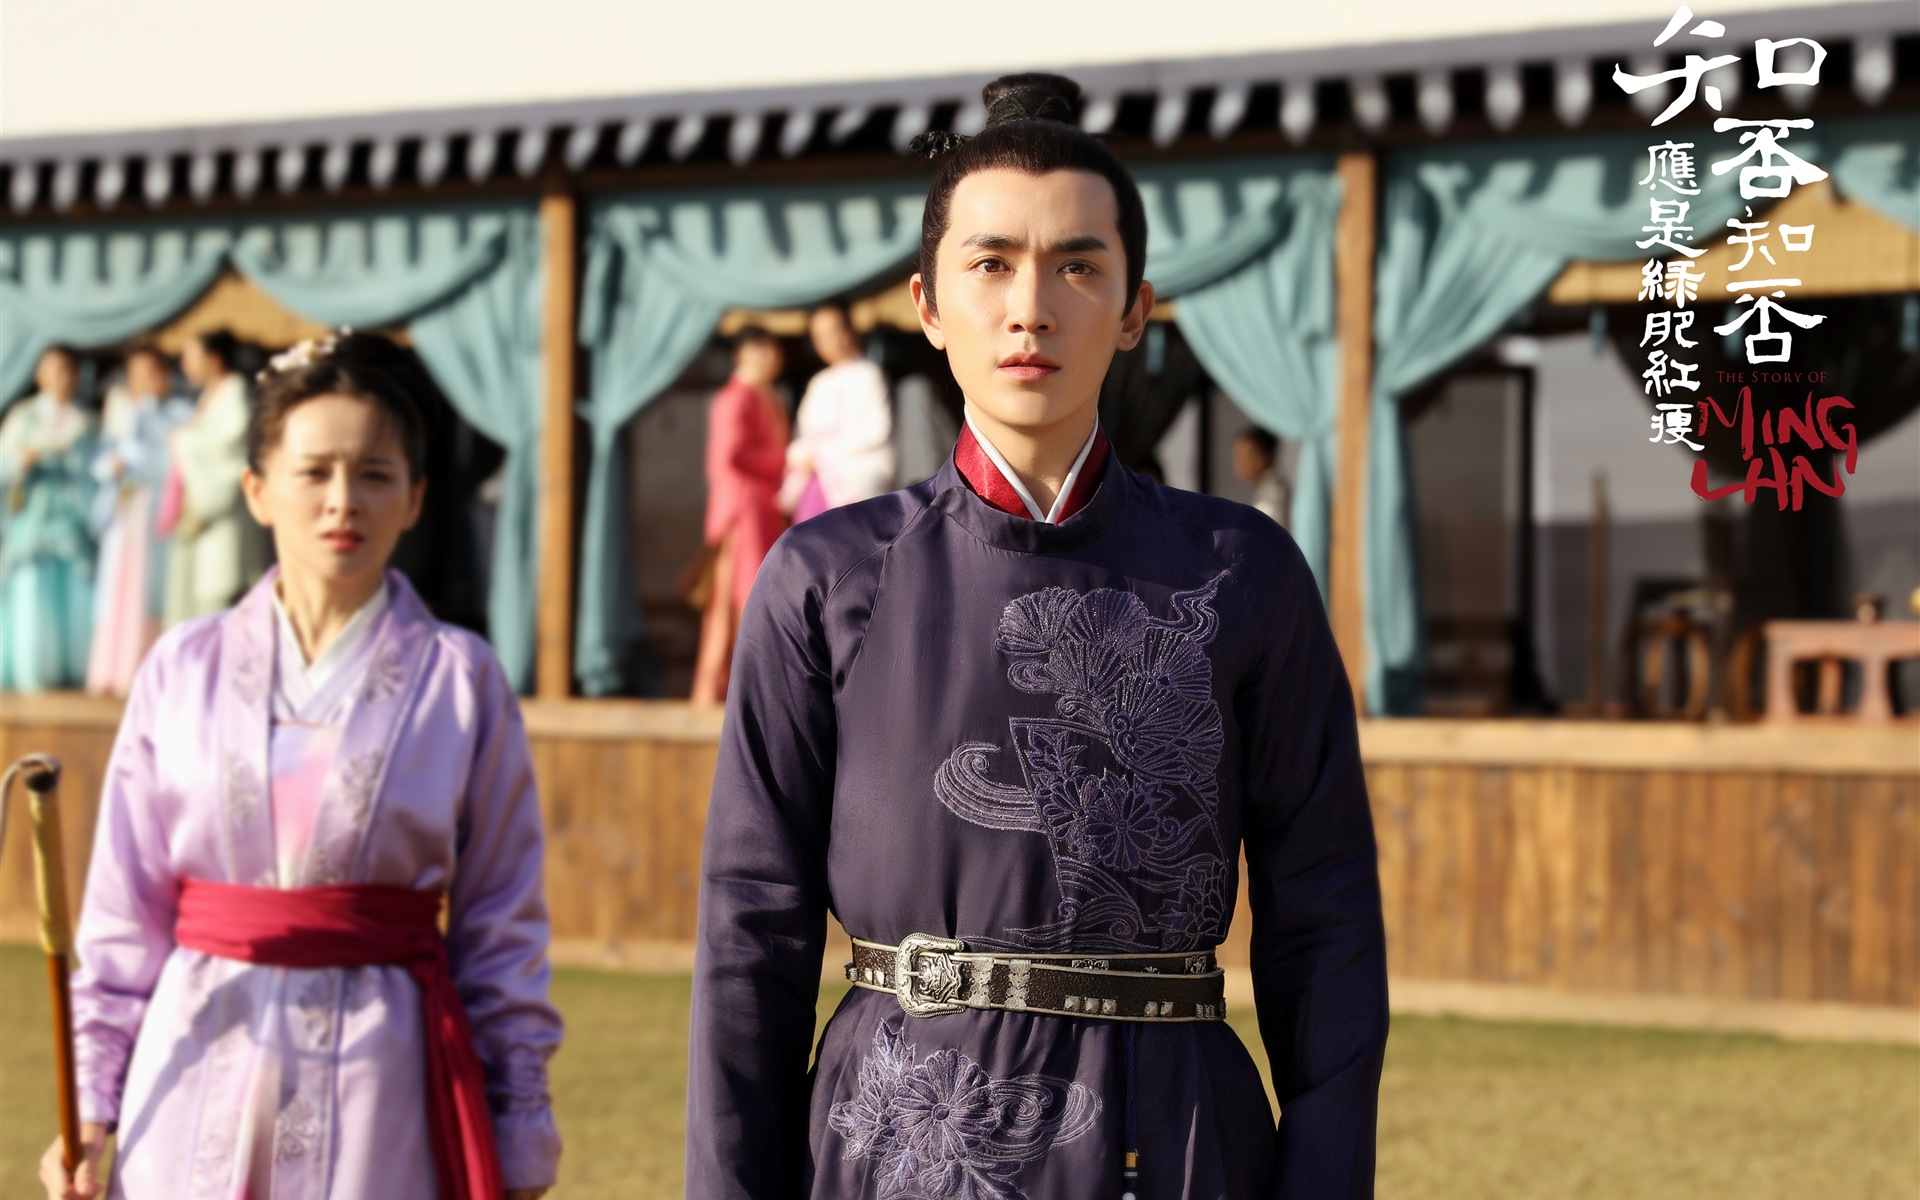 The Story Of MingLan, TV series HD wallpapers #38 - 1920x1200